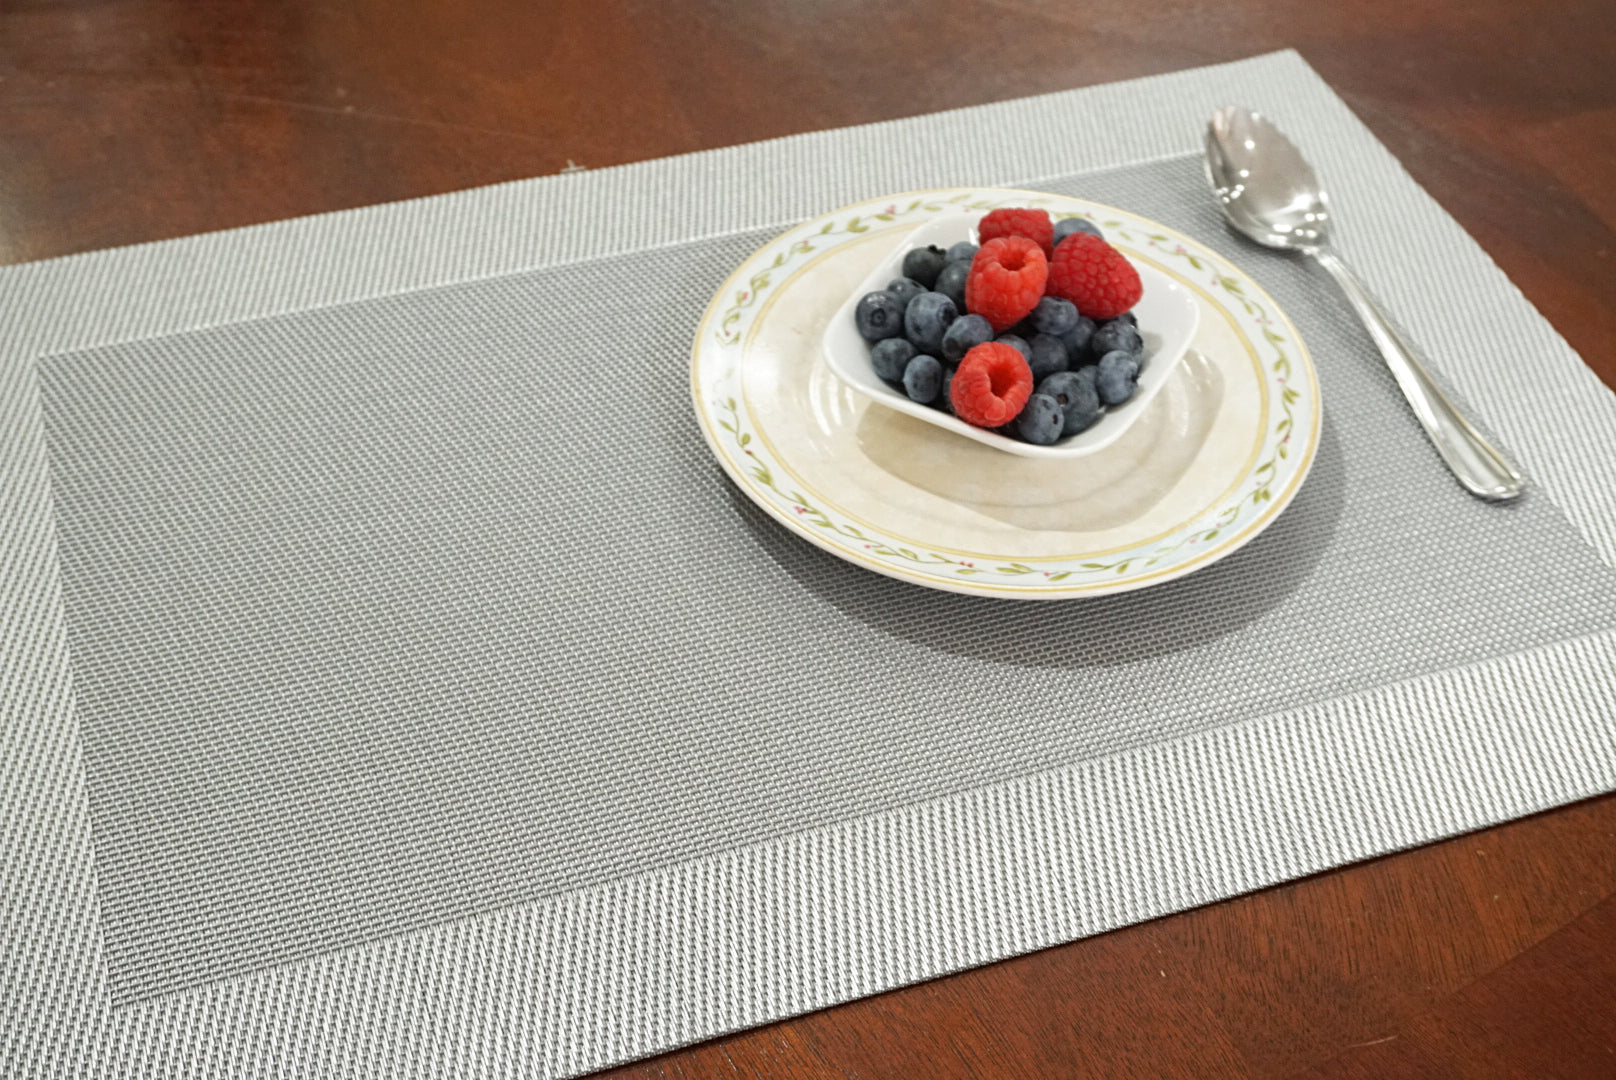 Dainty Home Santa Monica Woven Textilene Crossweave With Solid Geometric Pattern Reversible 13" x 19" Rectangular Placemats